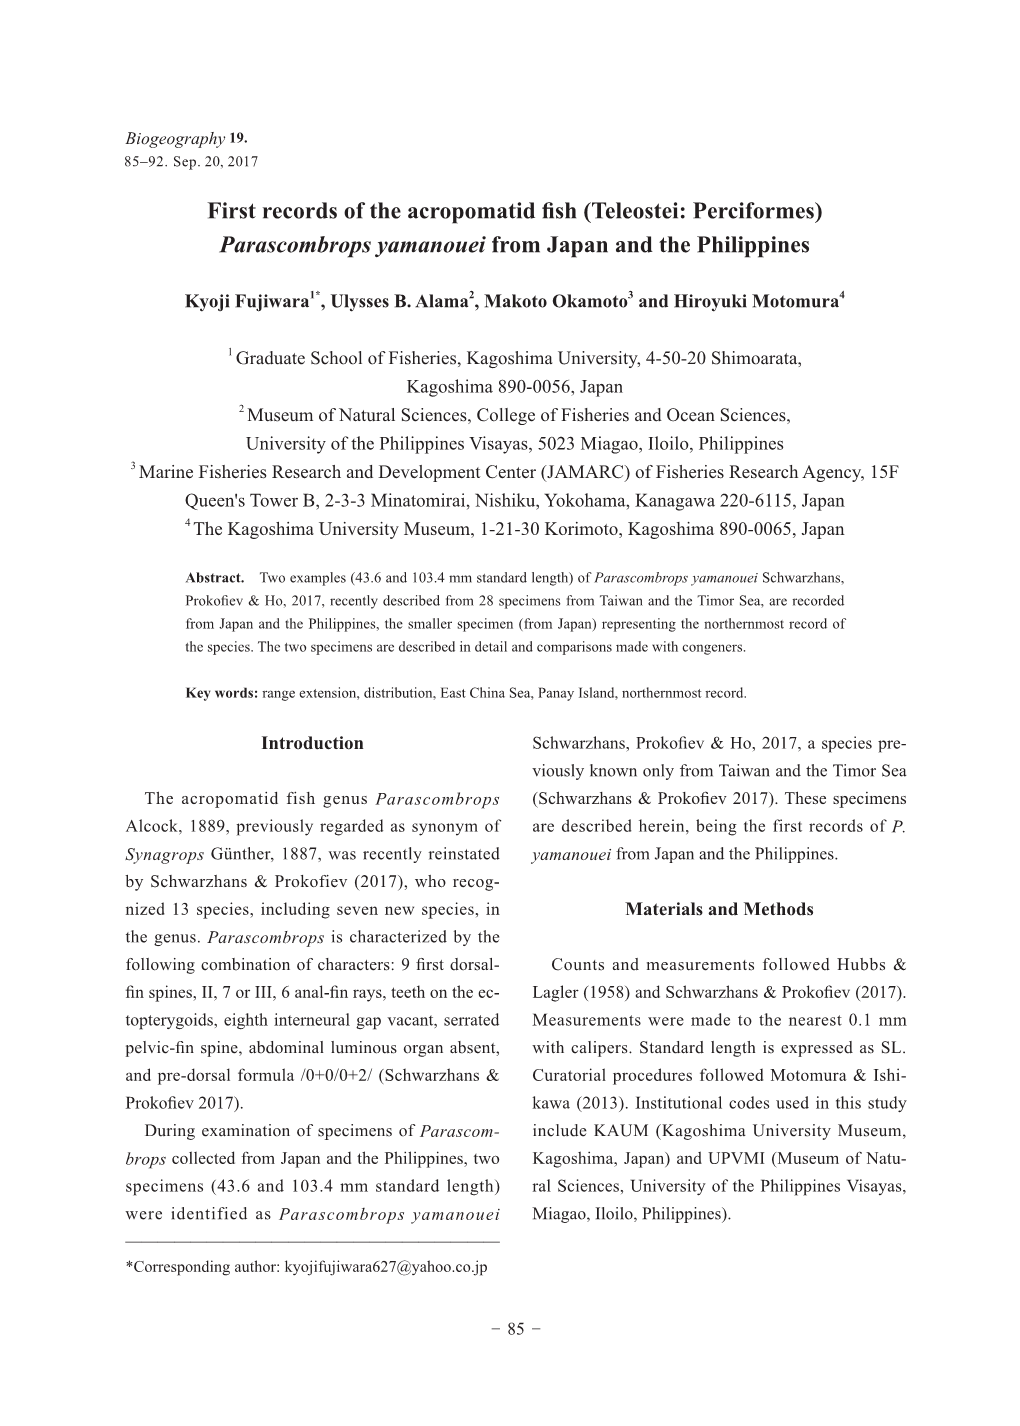 First Records of the Acropomatid Fish (Teleostei: Perciformes) Parascombrops Yamanouei from Japan and the Philippines